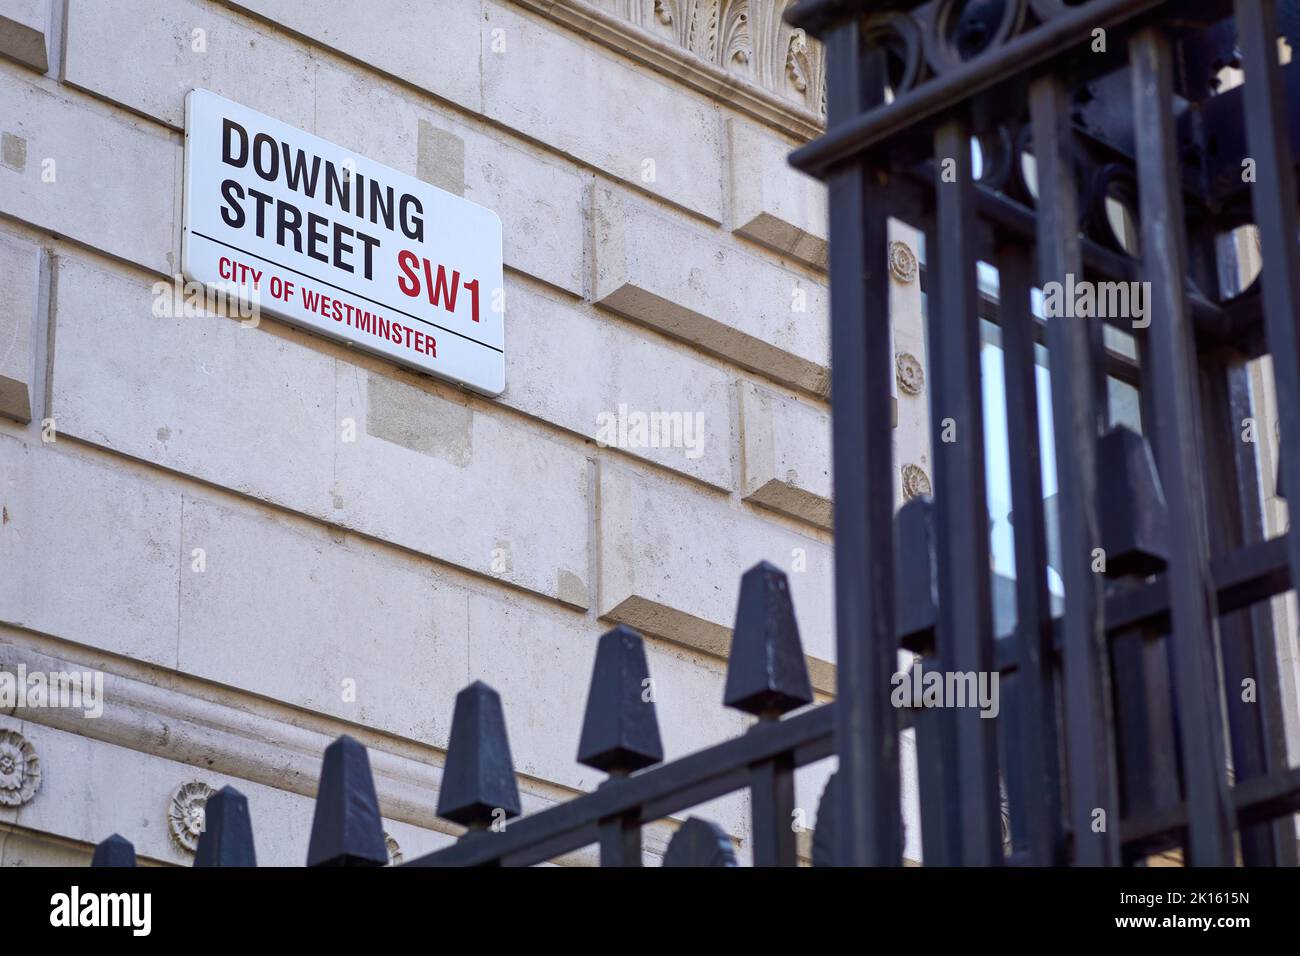 Downing Street sign Stock Photo